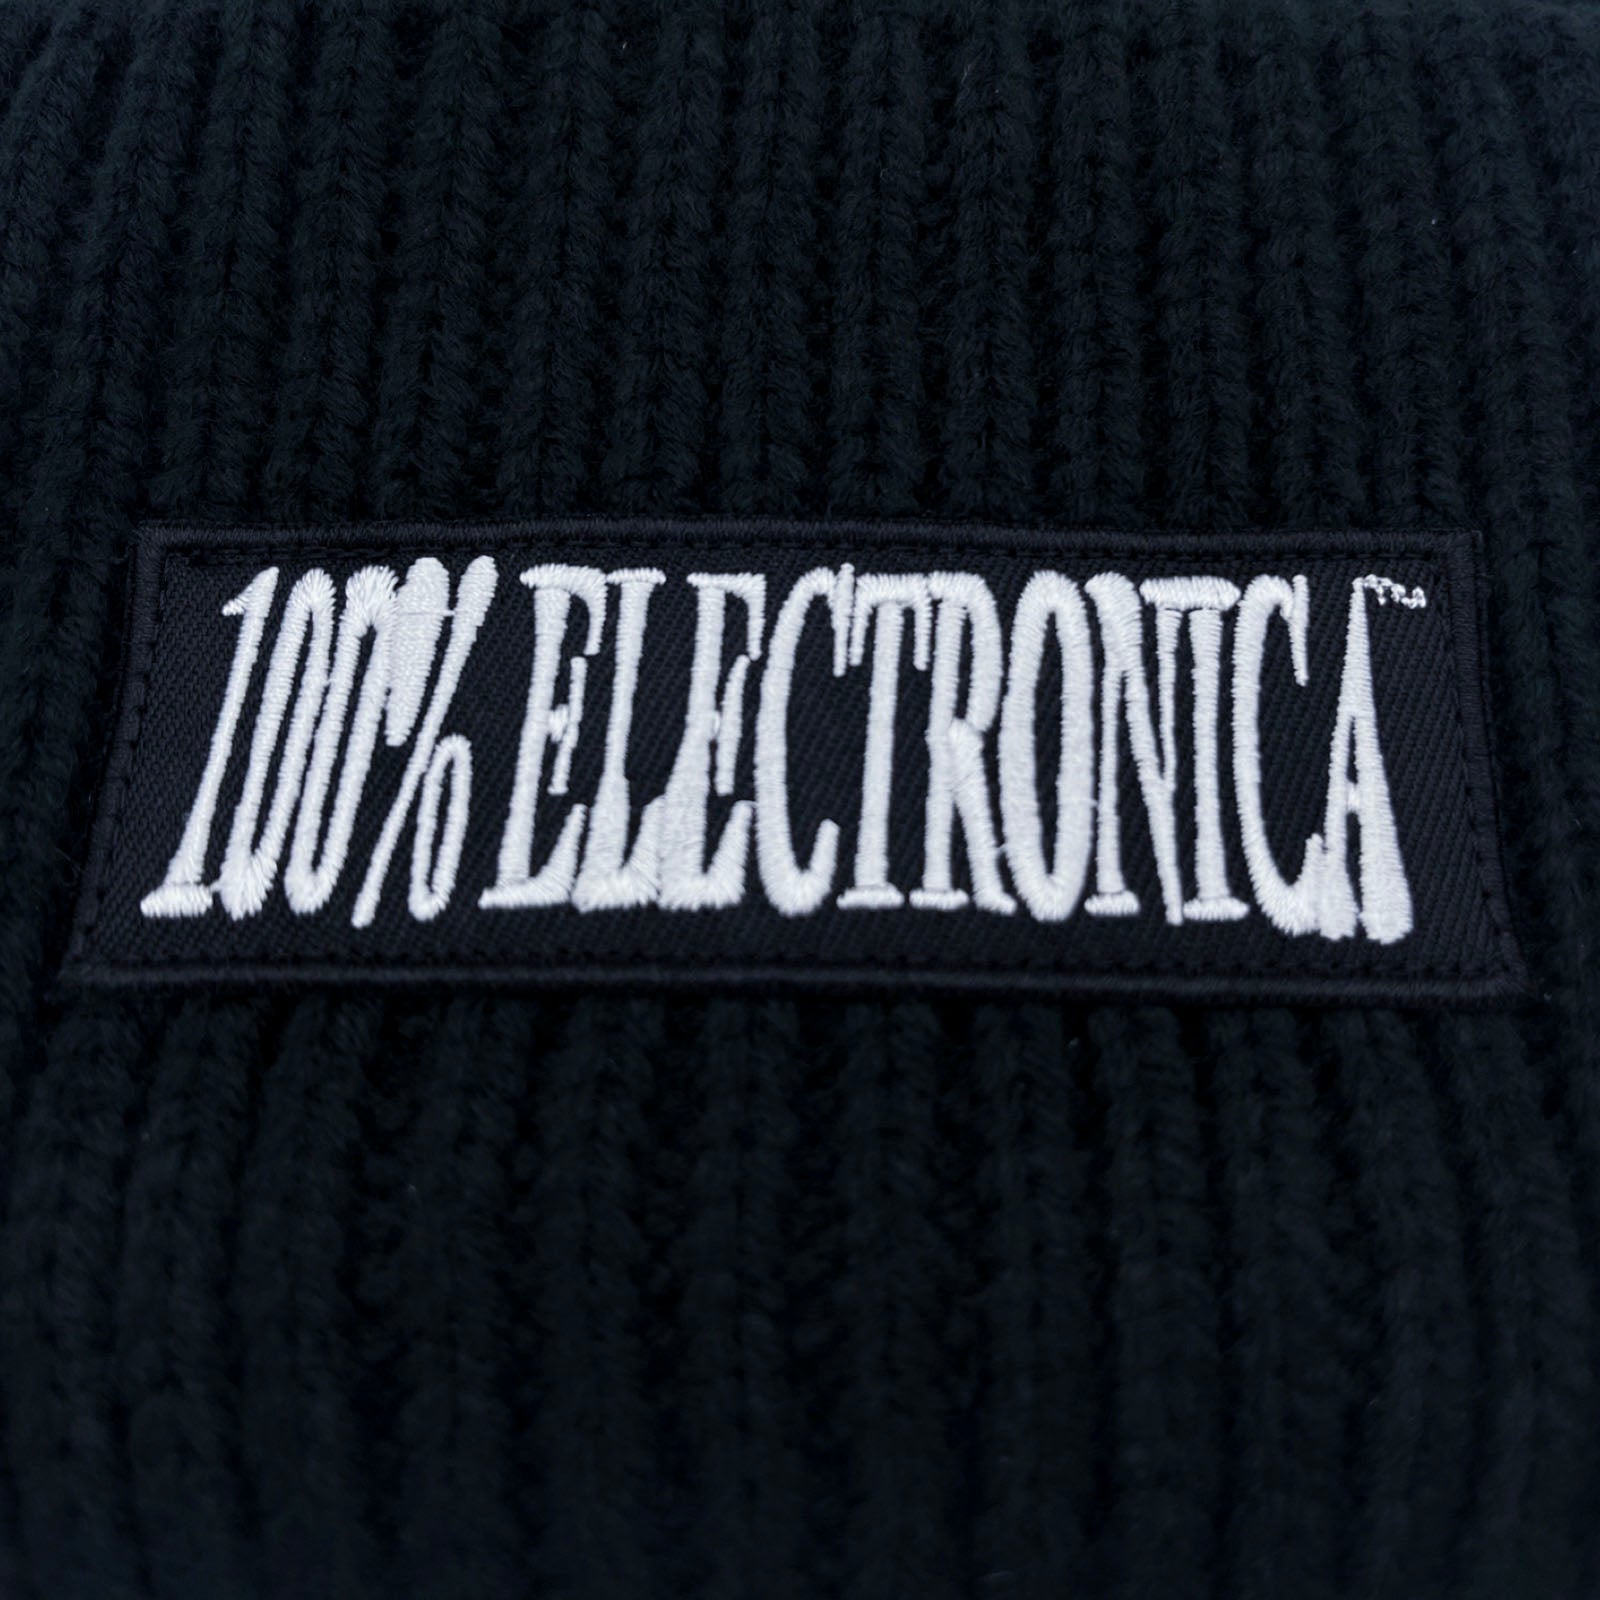 100% Electronica - Logo BIG Beanie (Black) - 100% Electronica Official Store (Photo 5)